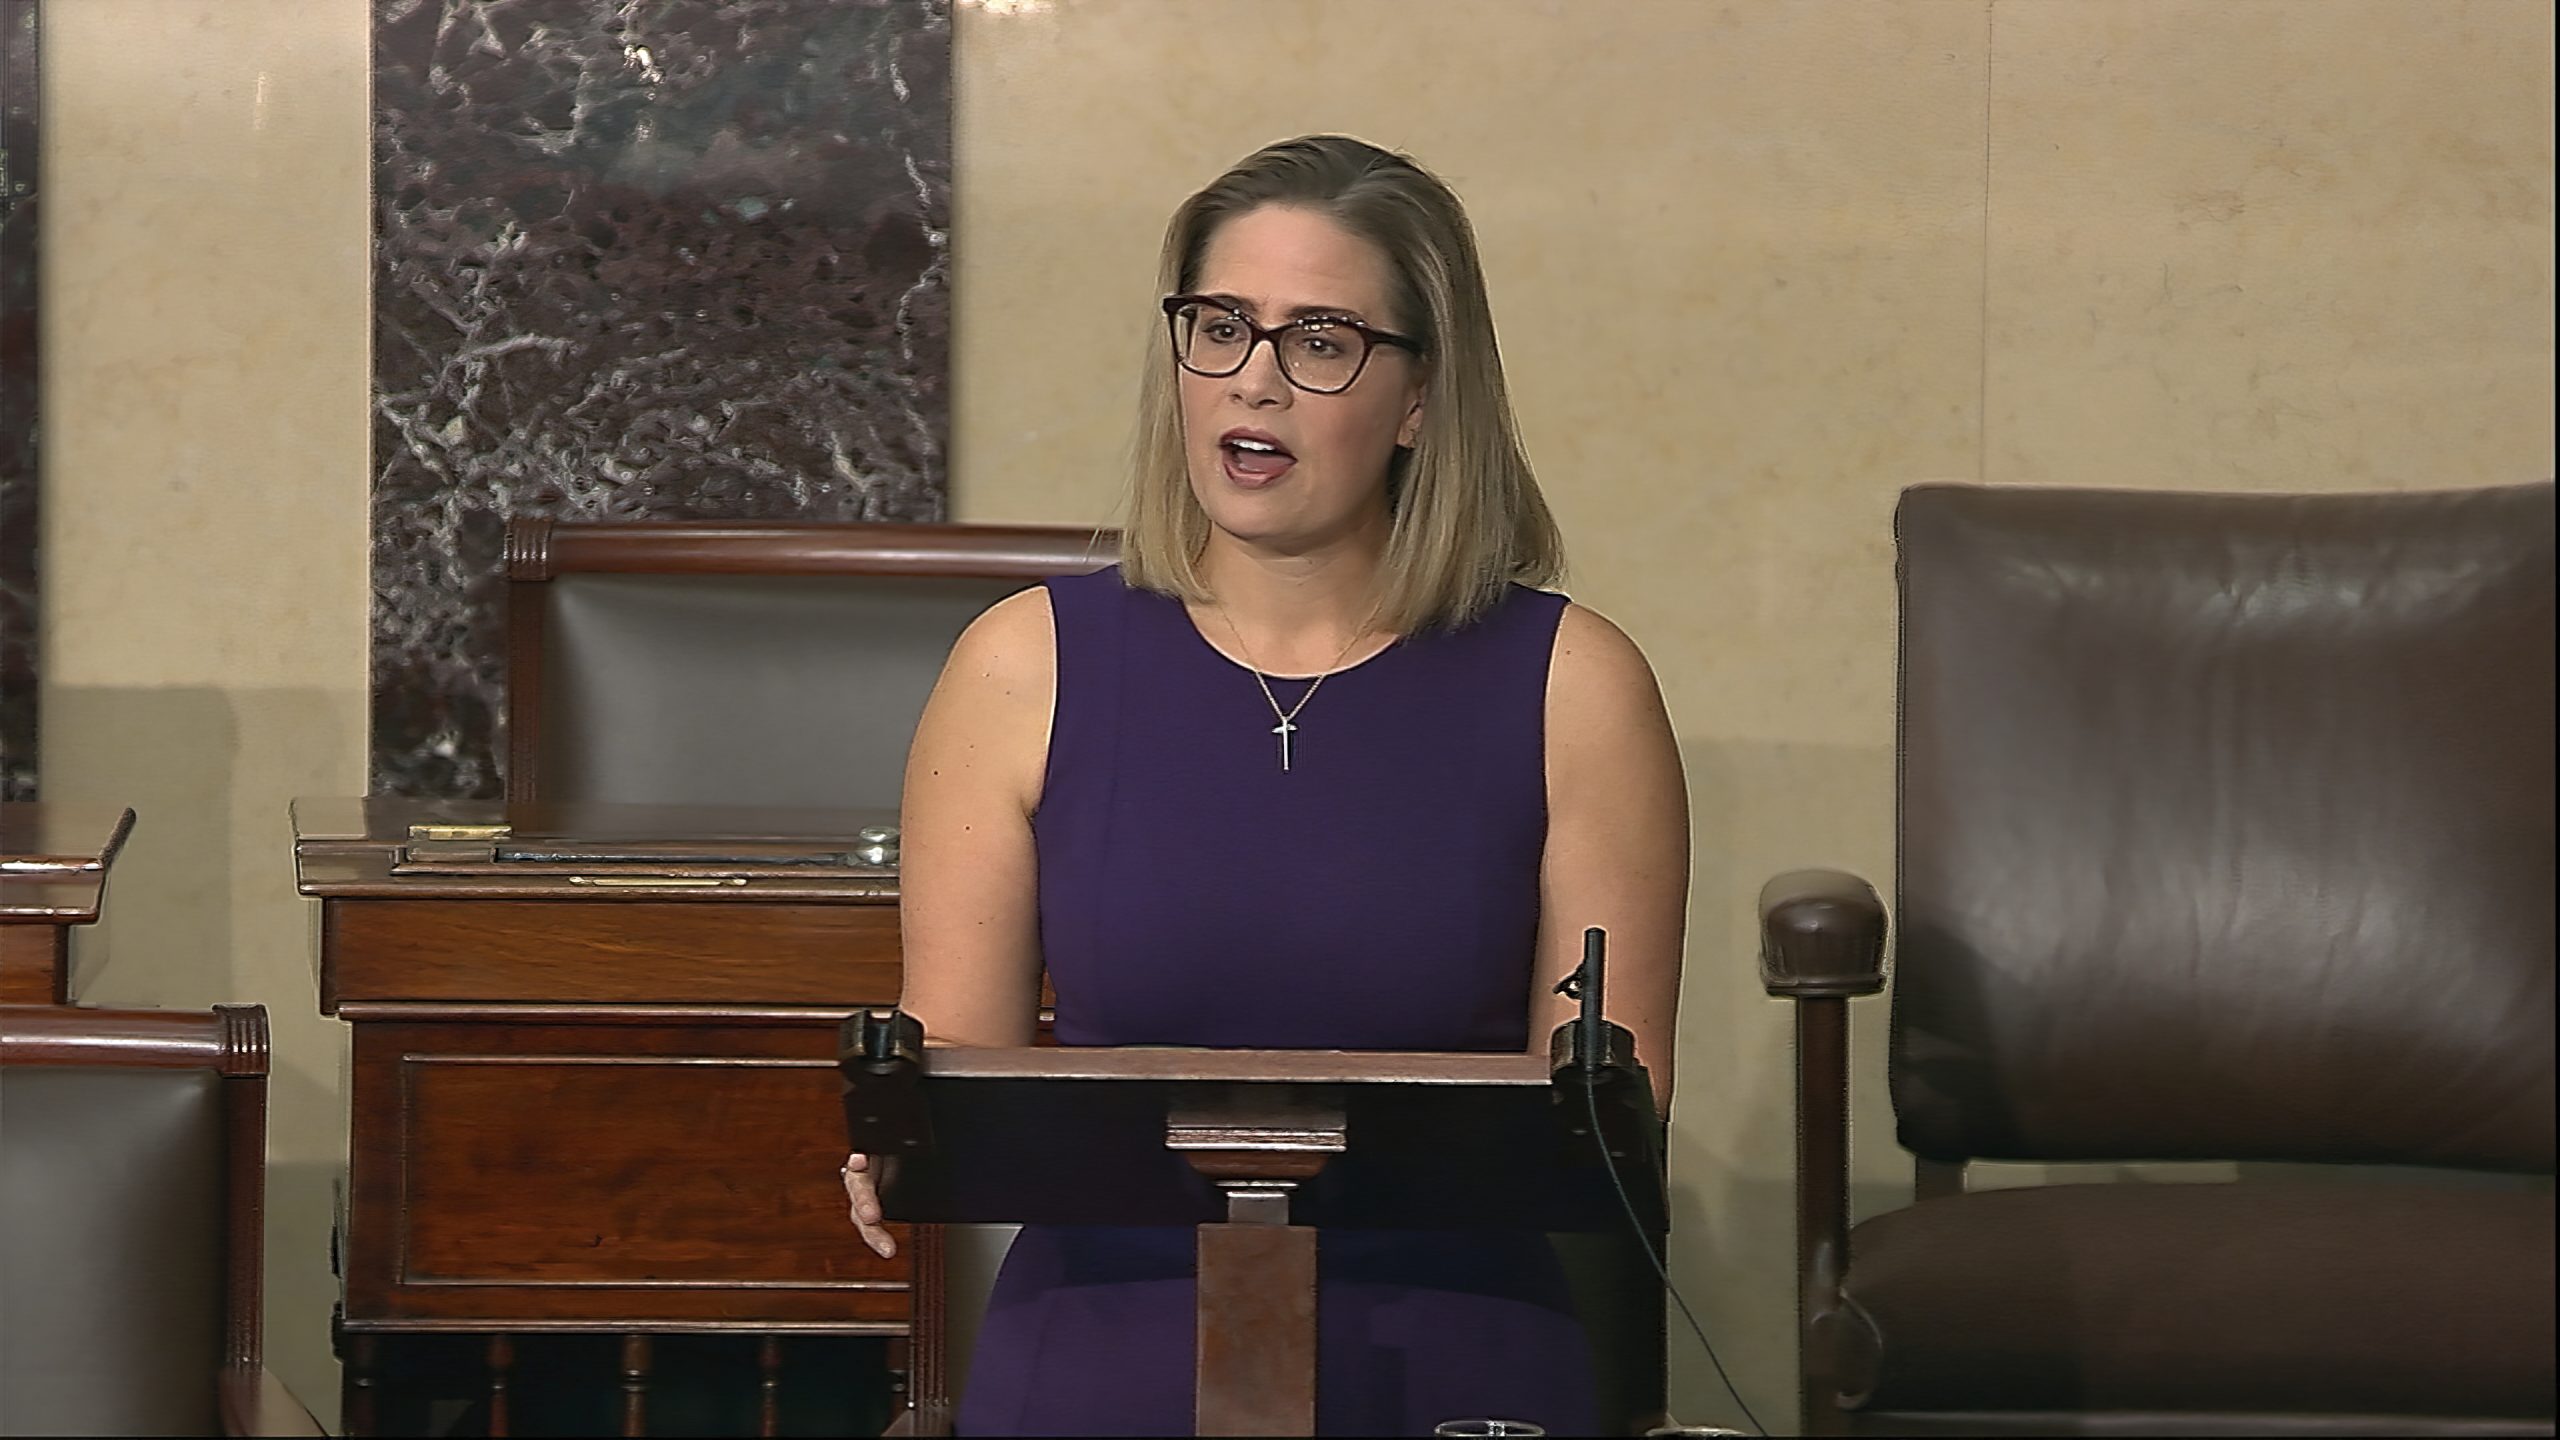 Arizona Democratic Party censures Sinema over voting rights stance